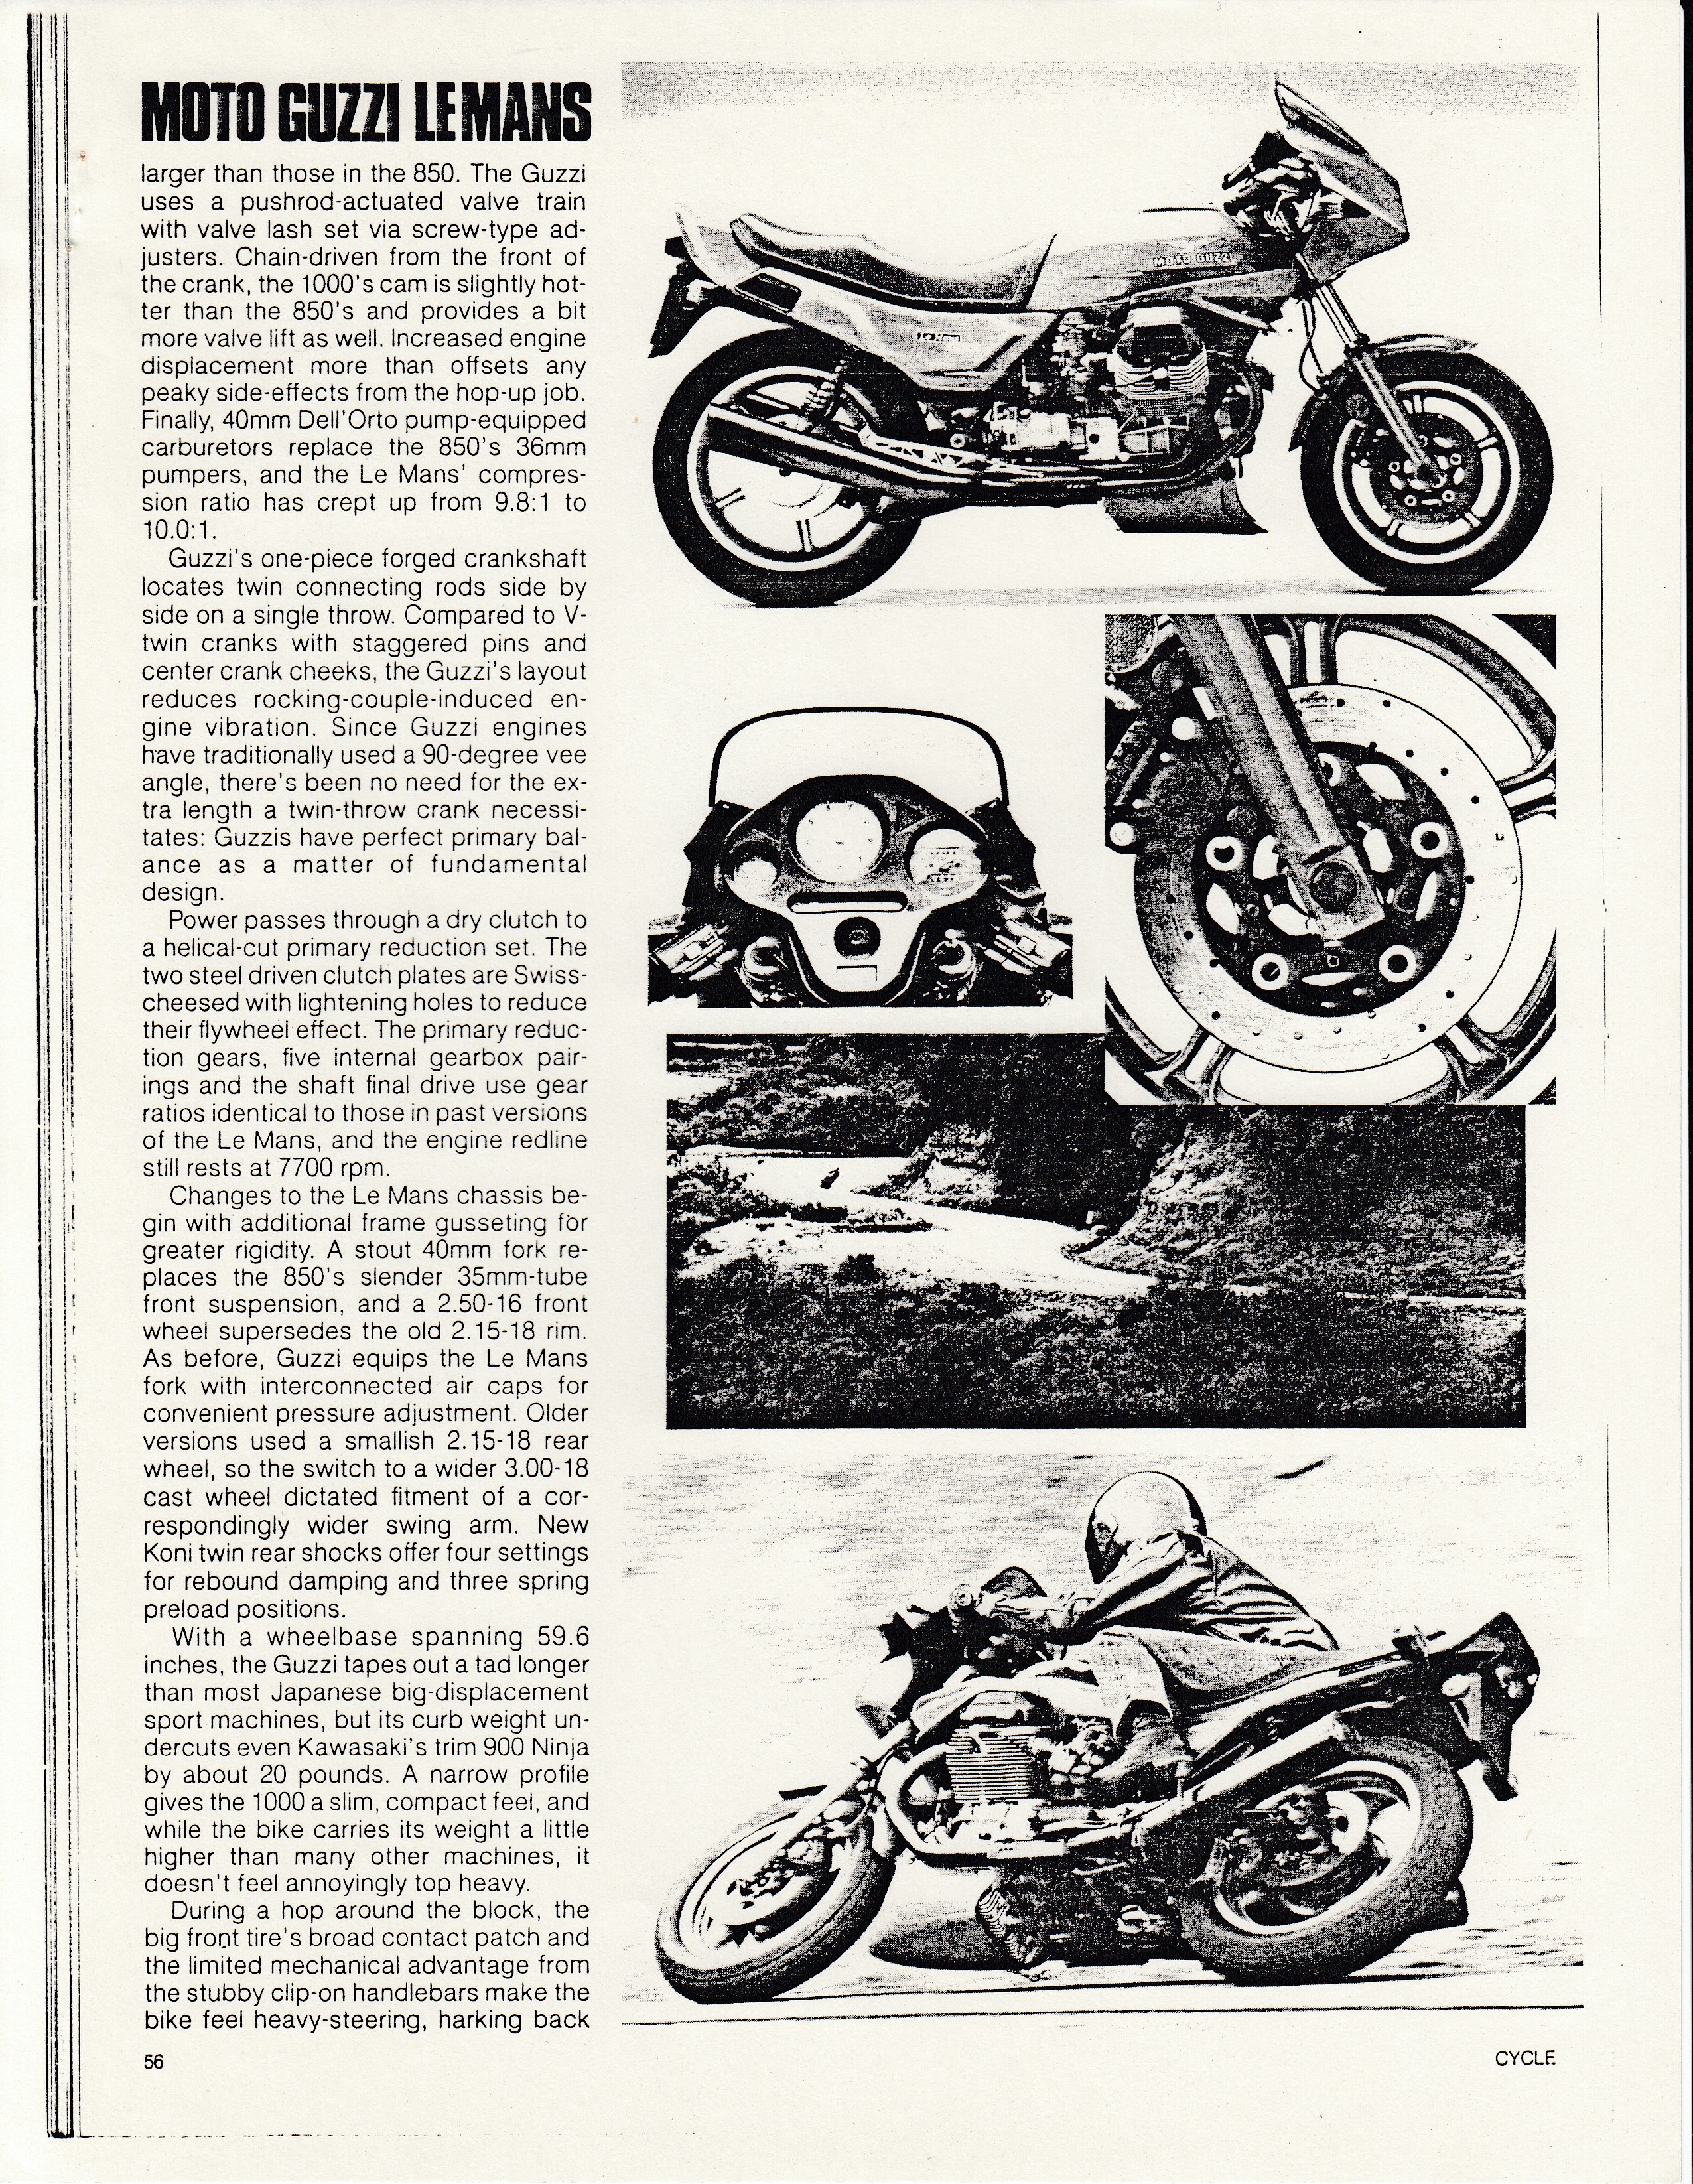 Article - Cycle (1986 March) Moto Guzzi Le Mans 1000 (with a sidebar about Dr. John Wittner)